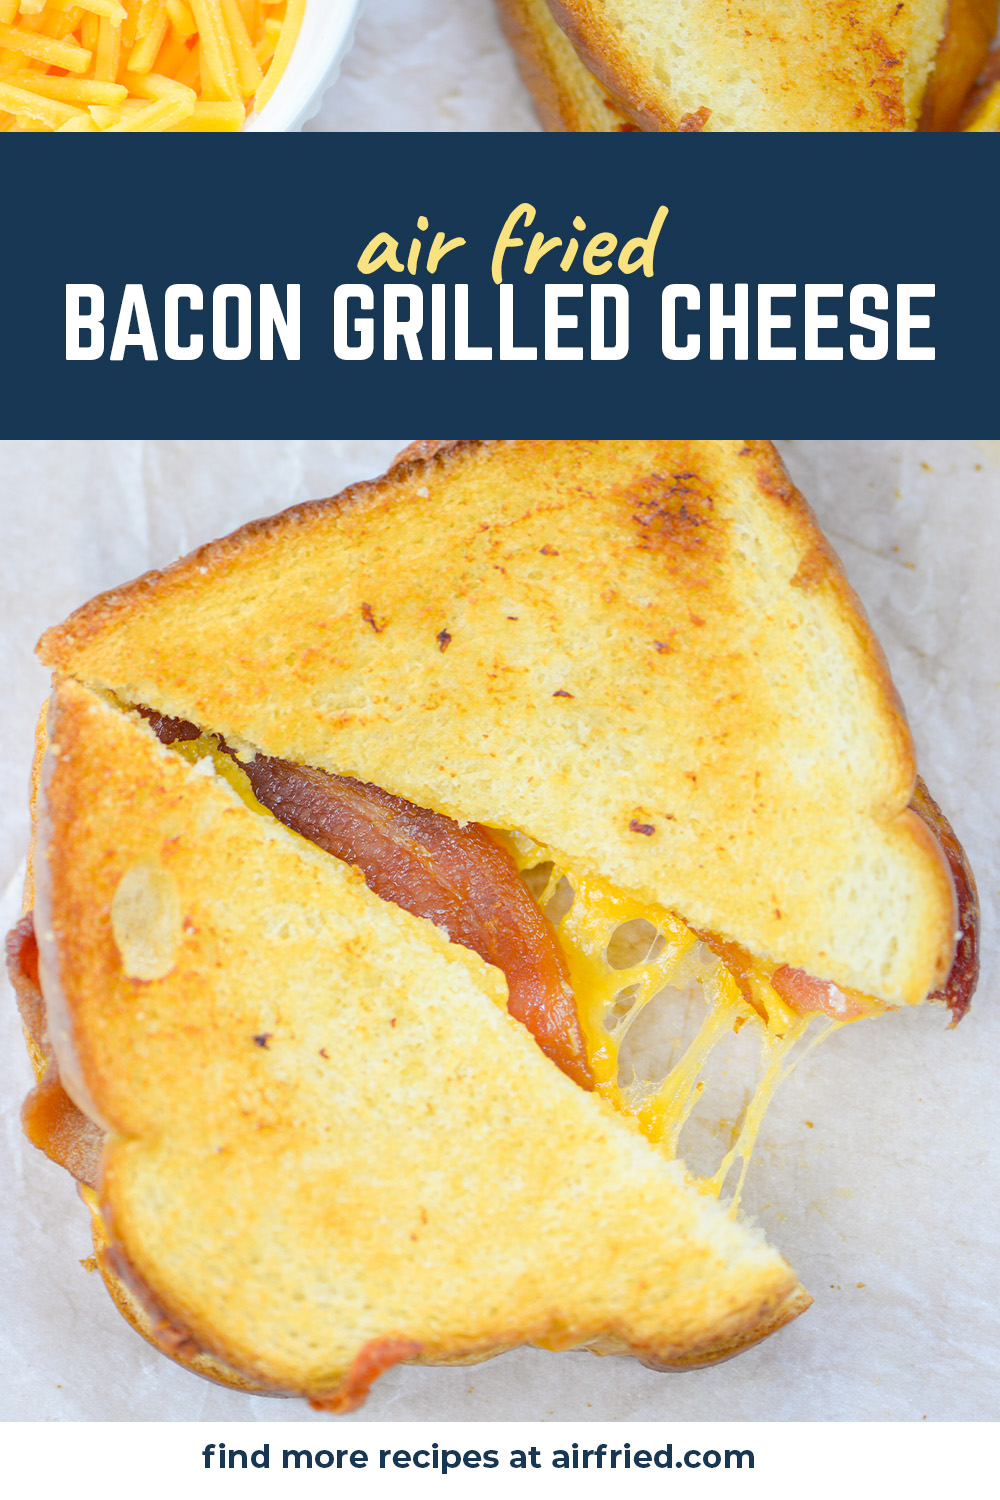 Bacon grilled cheese cut in half.